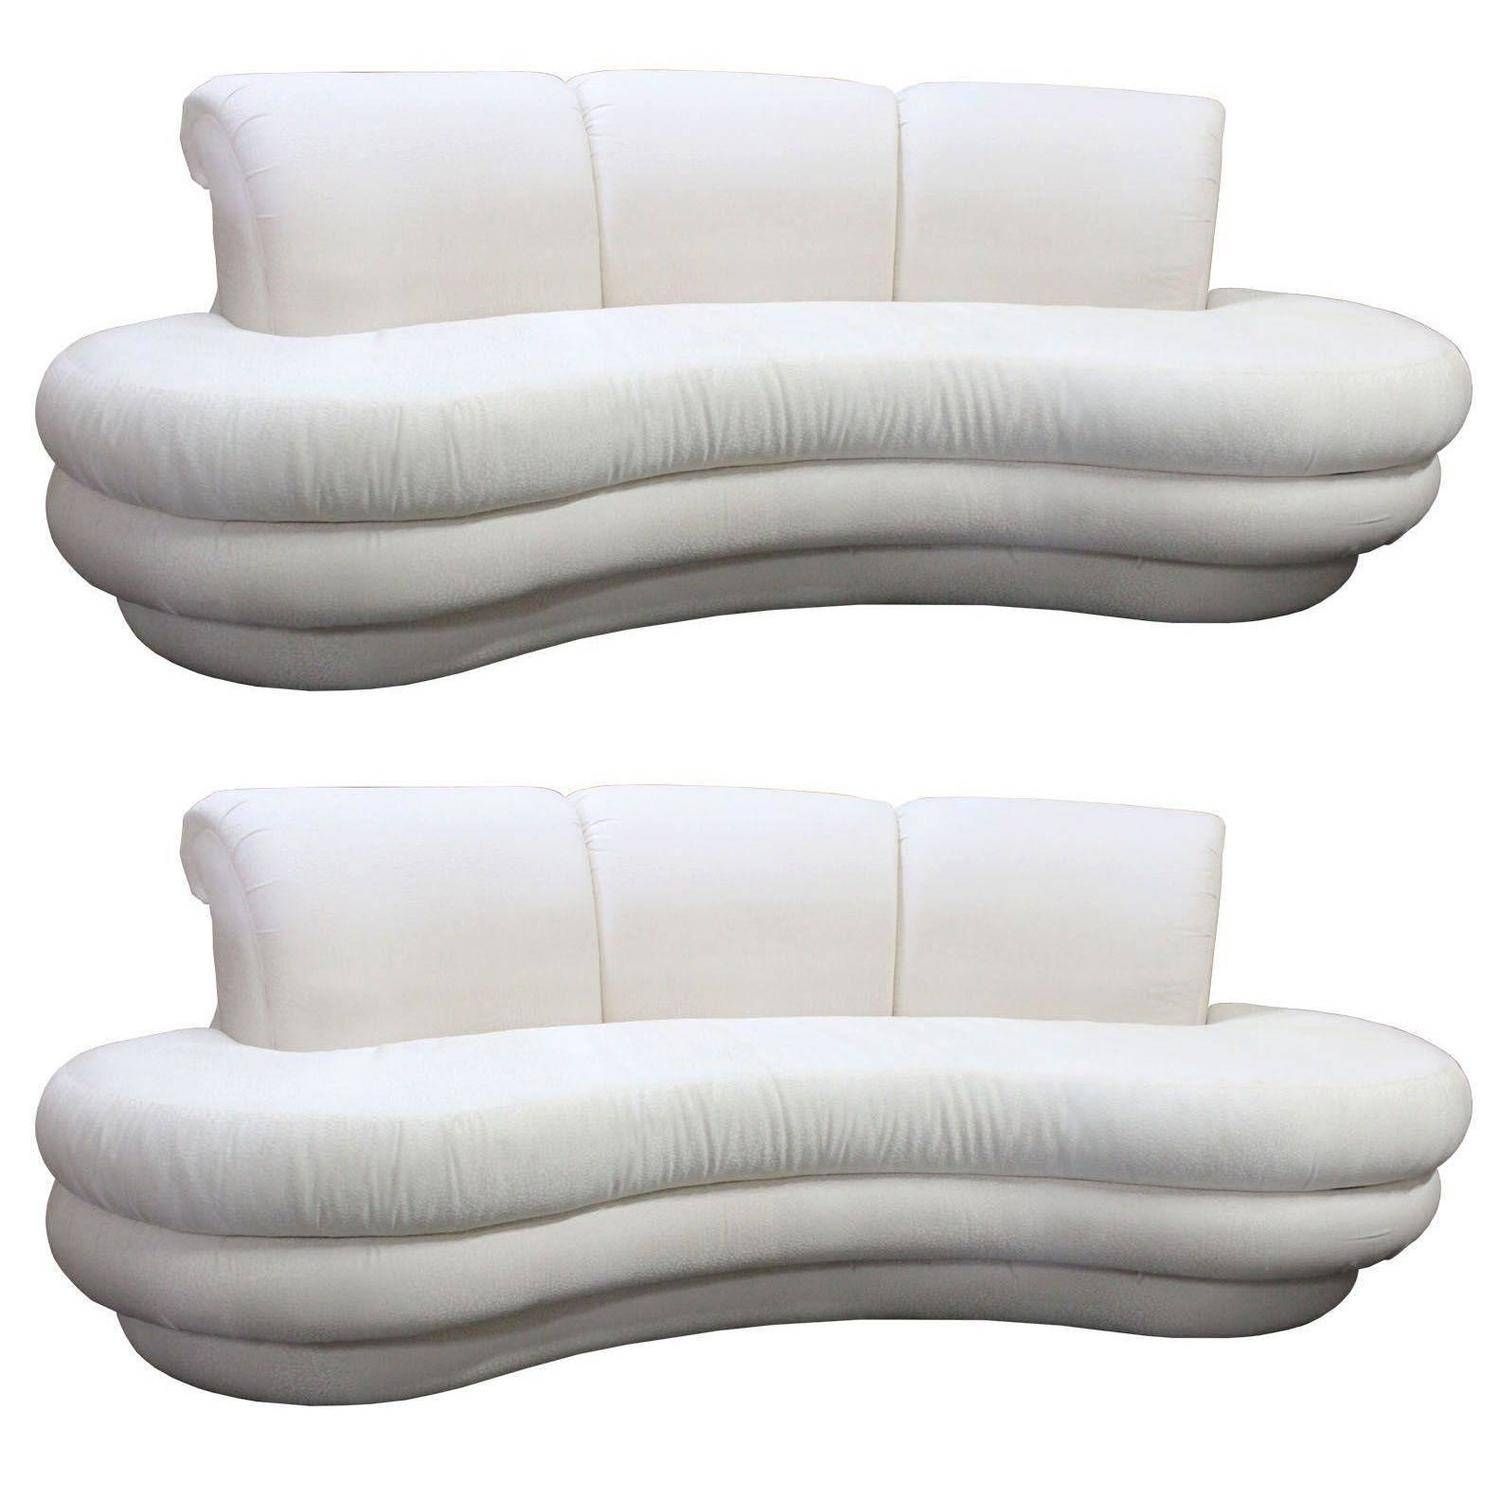 Pair Or Single Vintage Adrian Pearsall Kidney Cloud Curved Sofas Intended For Floating Cloud Couches (View 14 of 15)